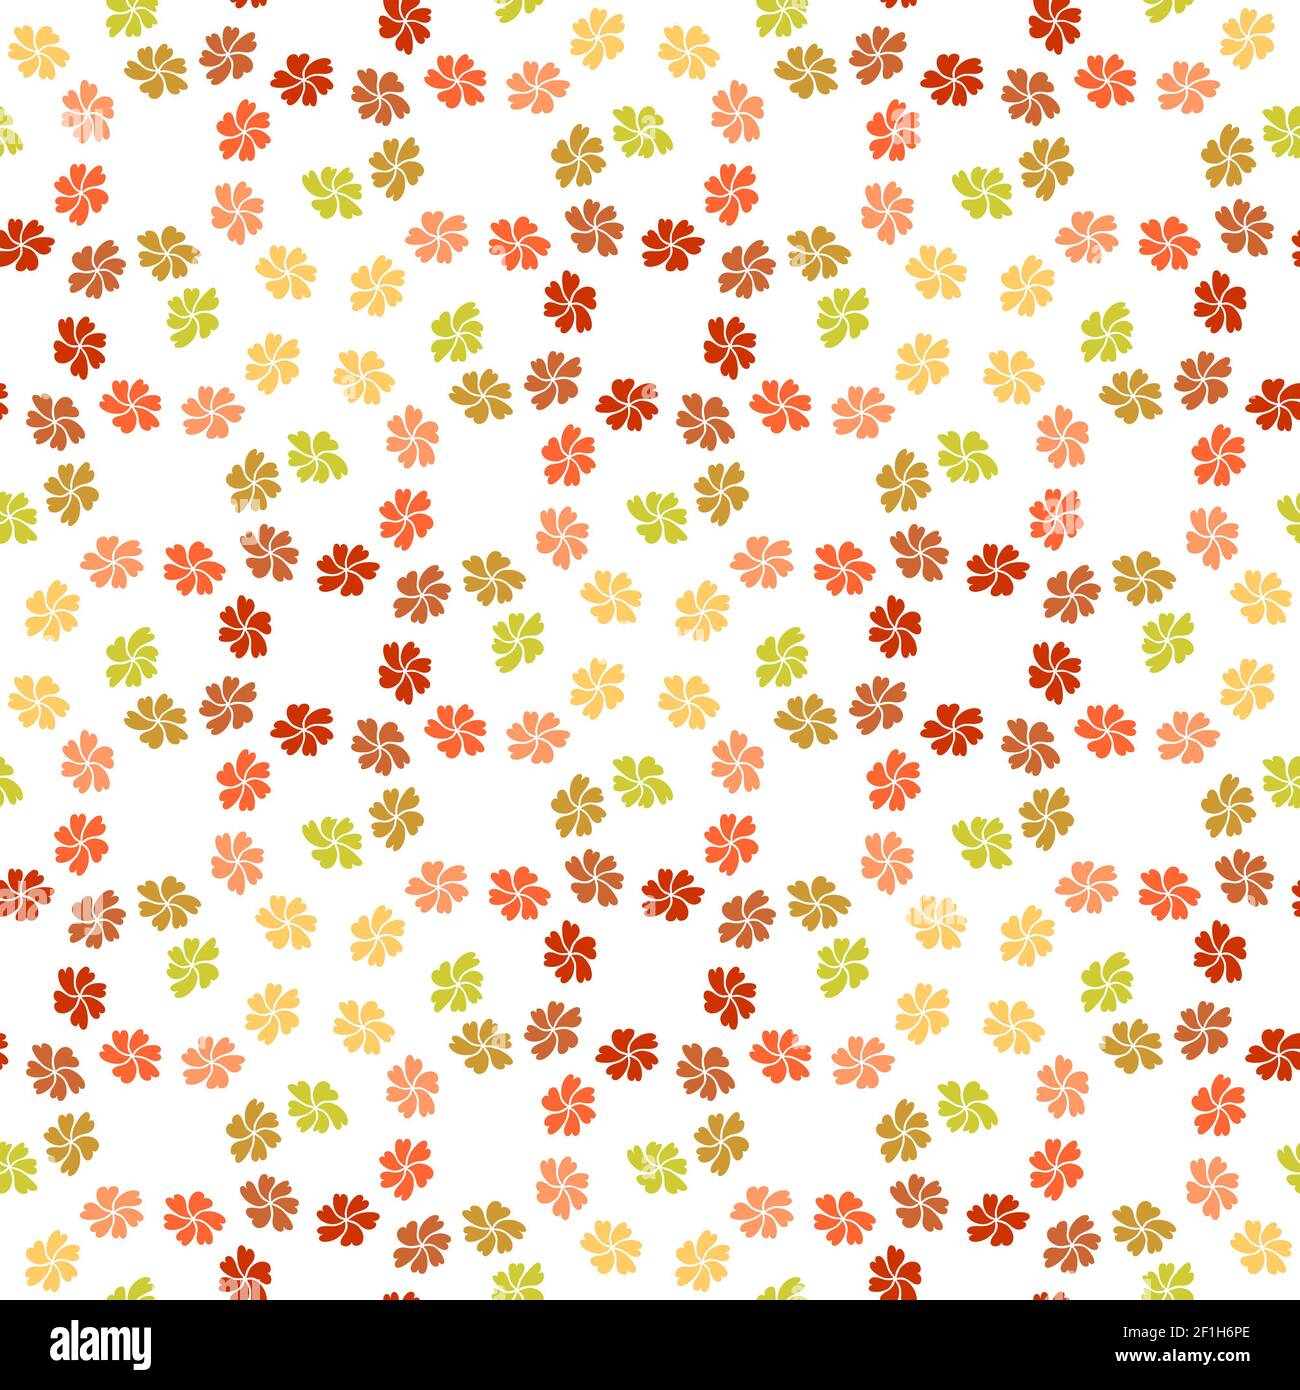 Seamless floral background. Stock Photo